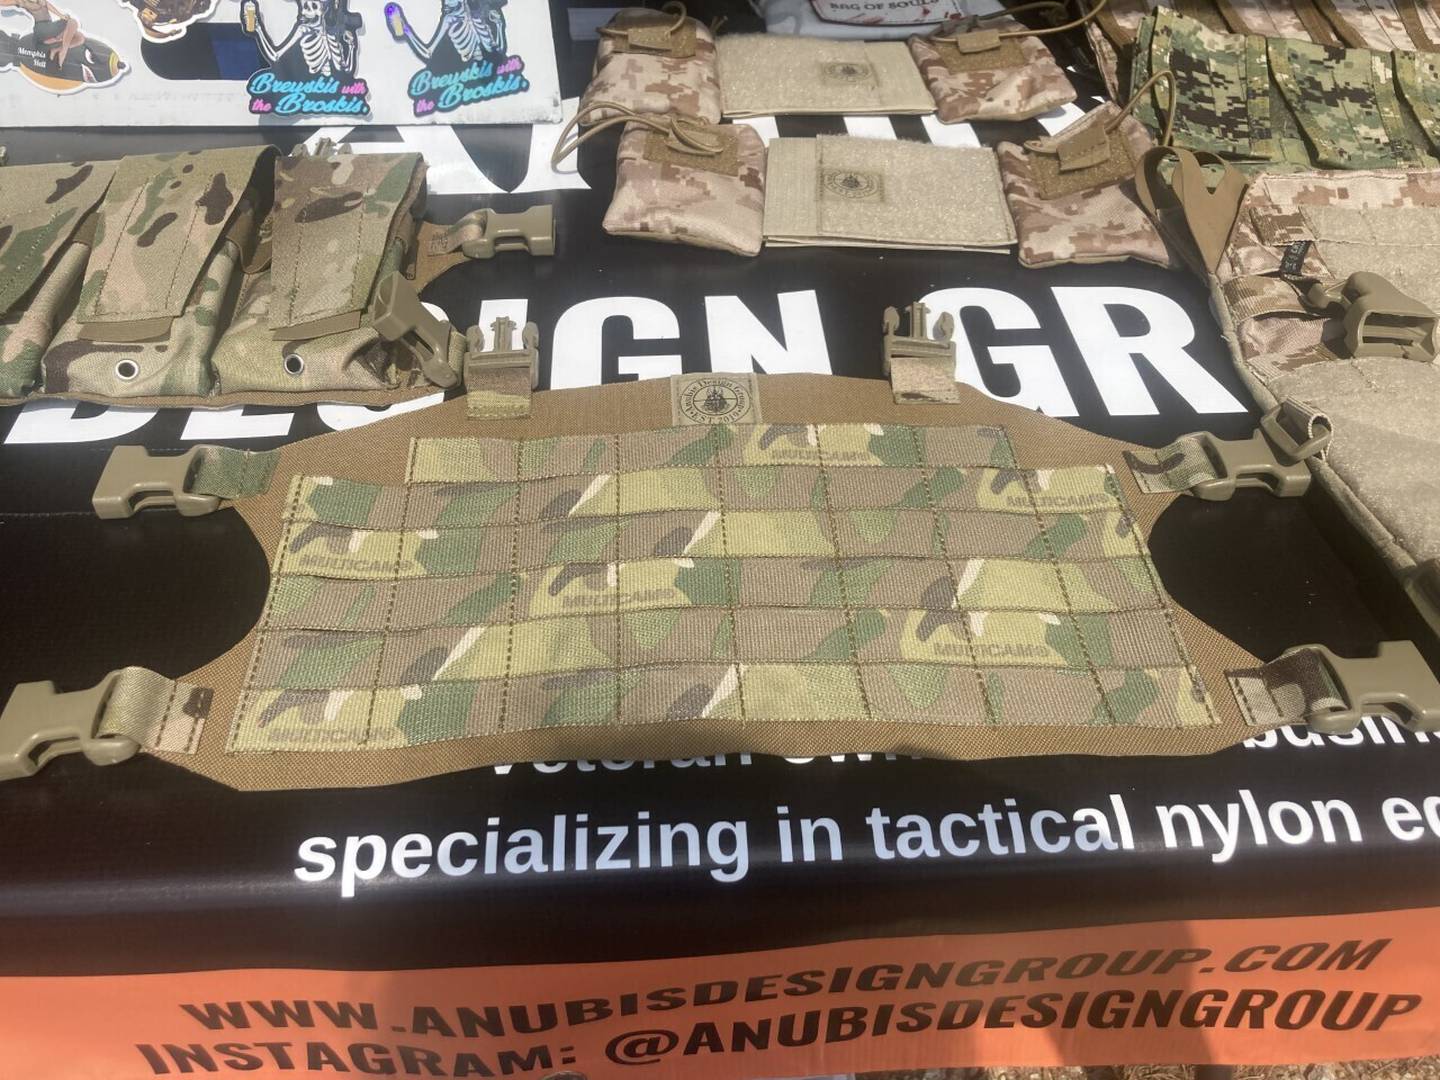 Anubis Design Group specializes in making tactical nylon gear for the military, law enforcement and civilians.